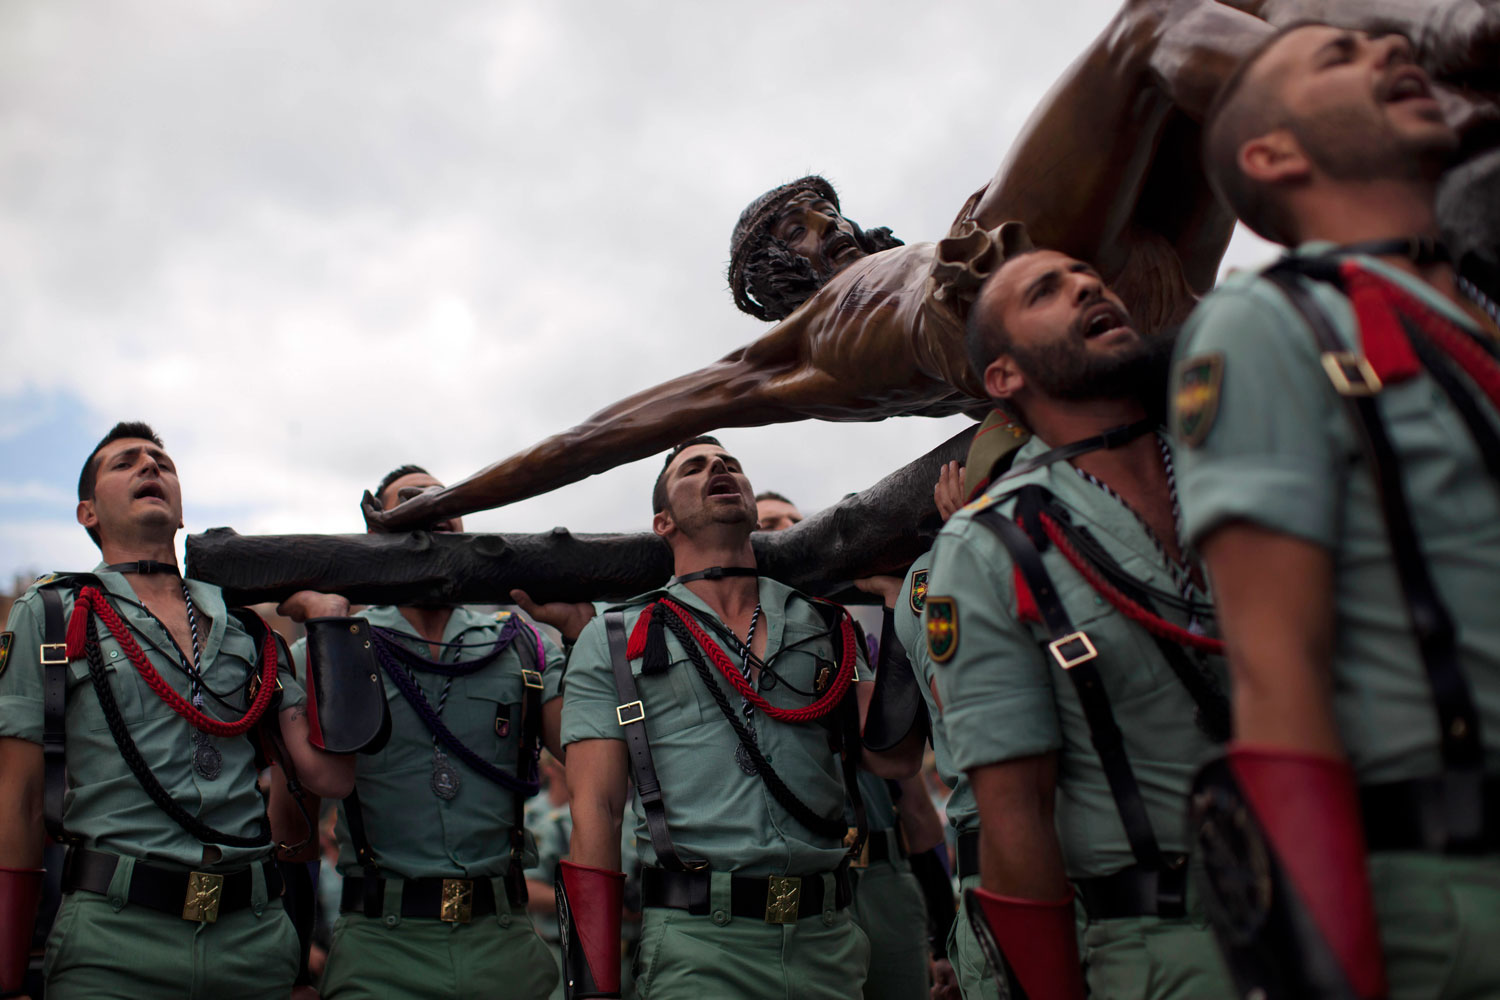 April 5, 2012.Members of the Spanish Legion, an elite unit of the Spanish Army, carry El Cristo de la Buena Muerte, or Christ of the Good Death, during a ceremony ahead of a procession in Malaga, southern Spain. Hundreds of processions take place throughout Spain during the Easter Holy Week.